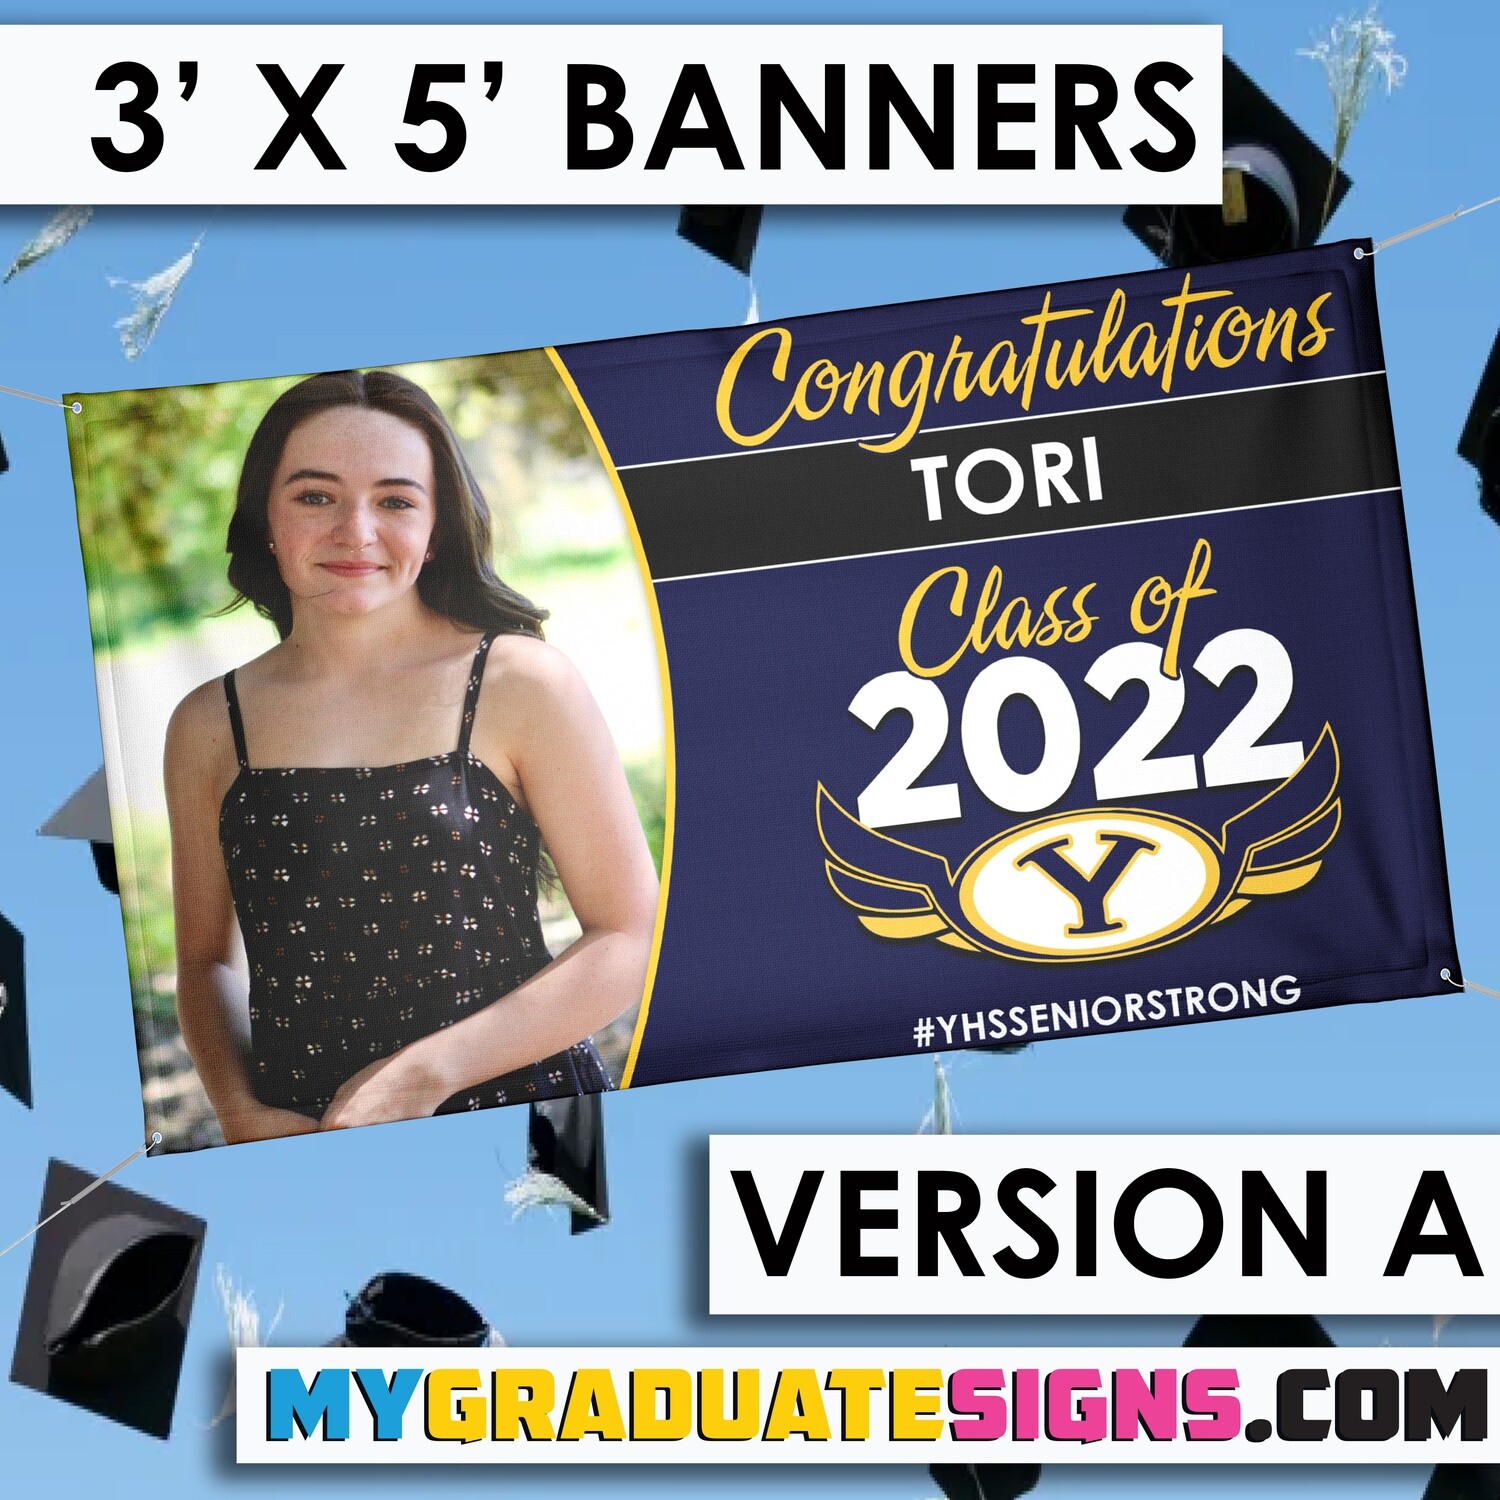 American Banner Pro - Banner Class of 2022 YUCAIPA HS